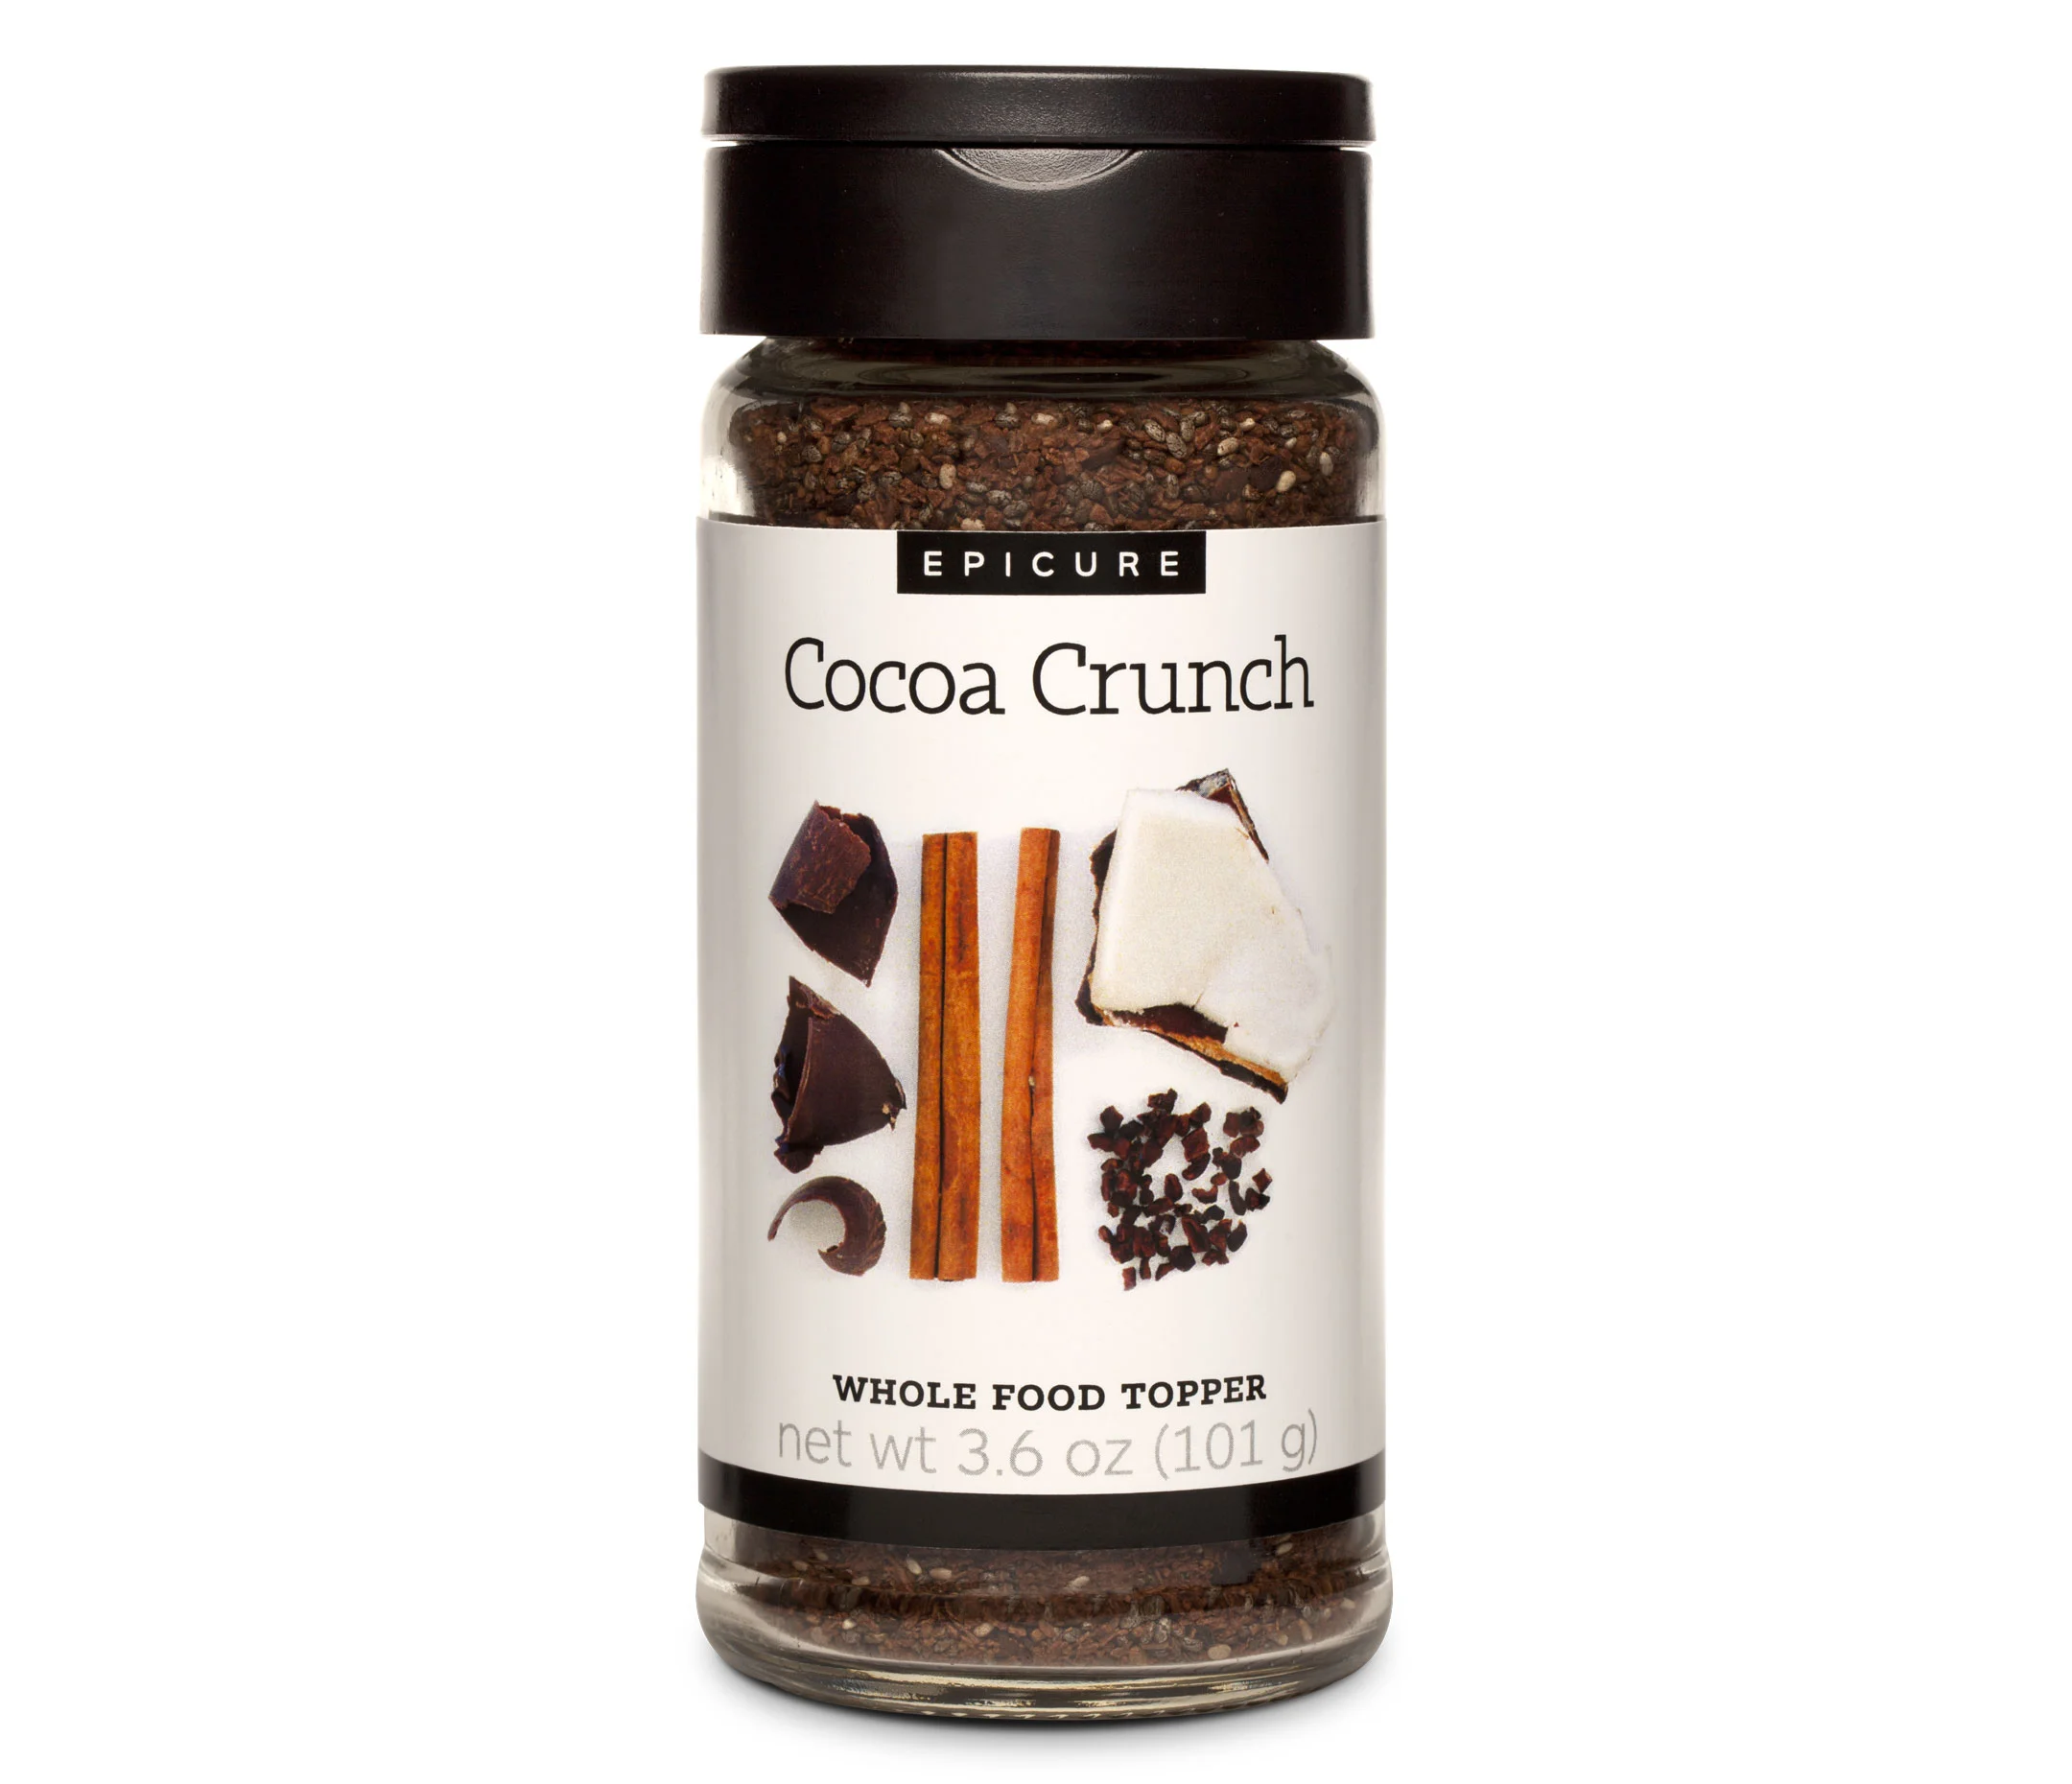 Cocoa Crunch Whole Food Topper